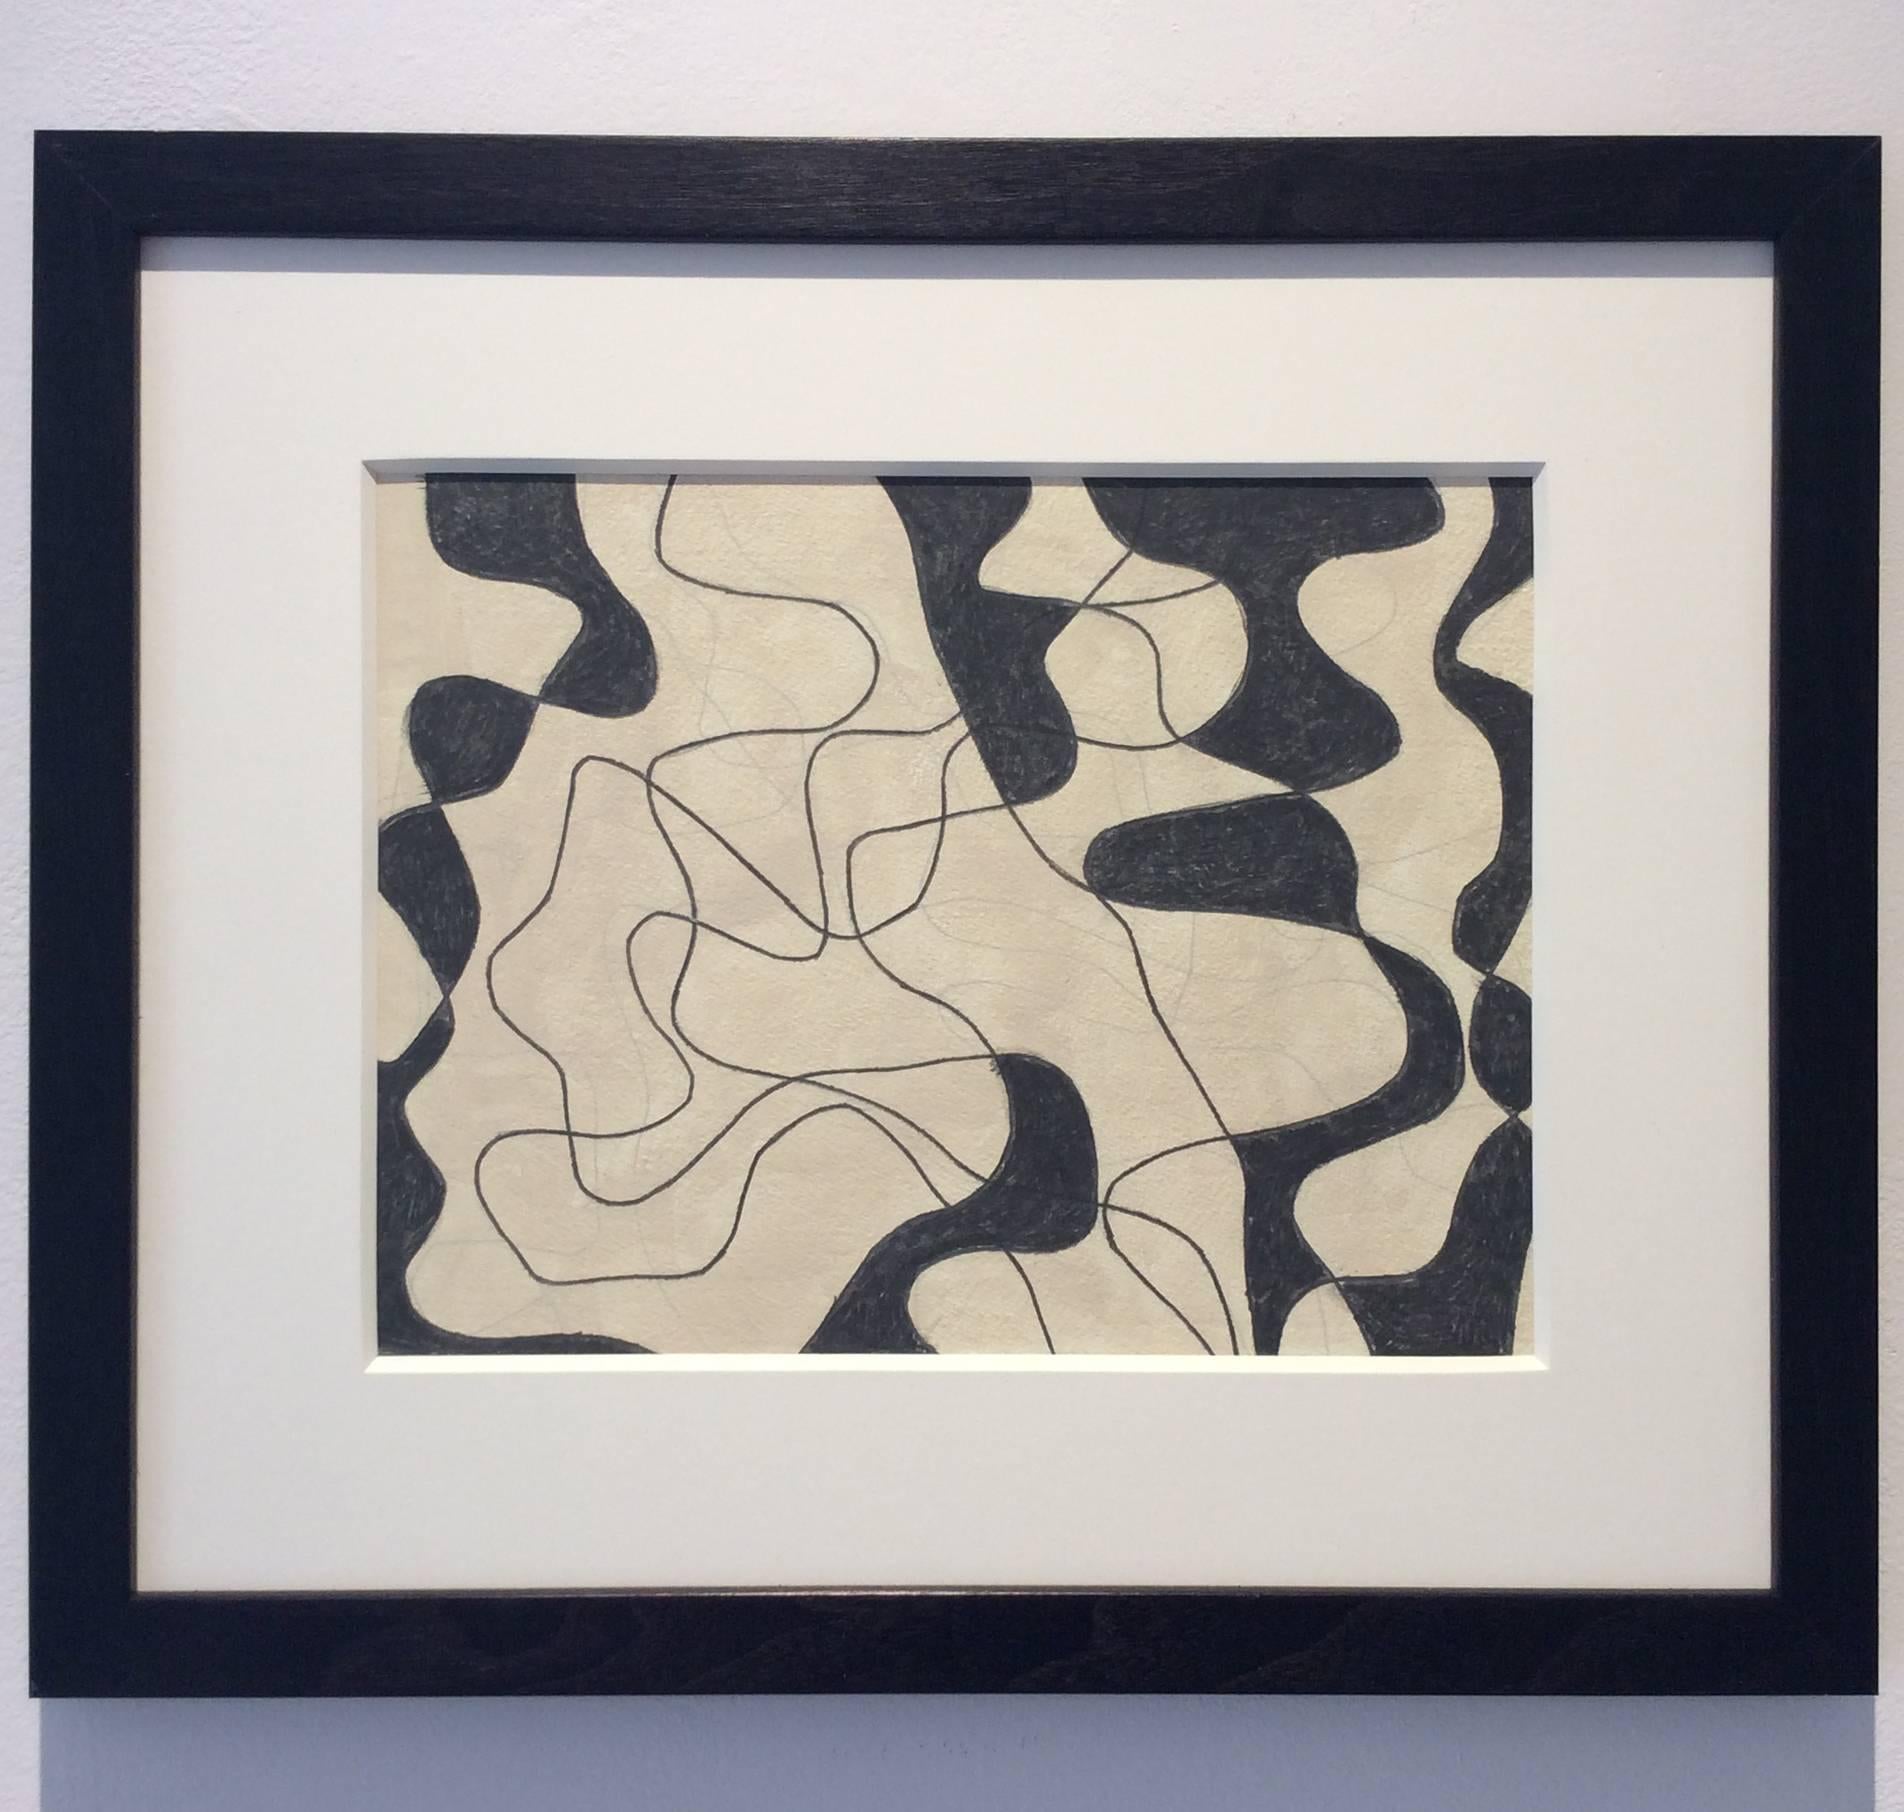 abstract graphite and acrylic drawing on Arches paper
15.25 x 18 inches framed
12 x 15 inches unframed

This graphite and acrylic abstract work on gesso-coated Arches watercolor paper is the work of East Hampton-based artist Ralph Stout. Stout's